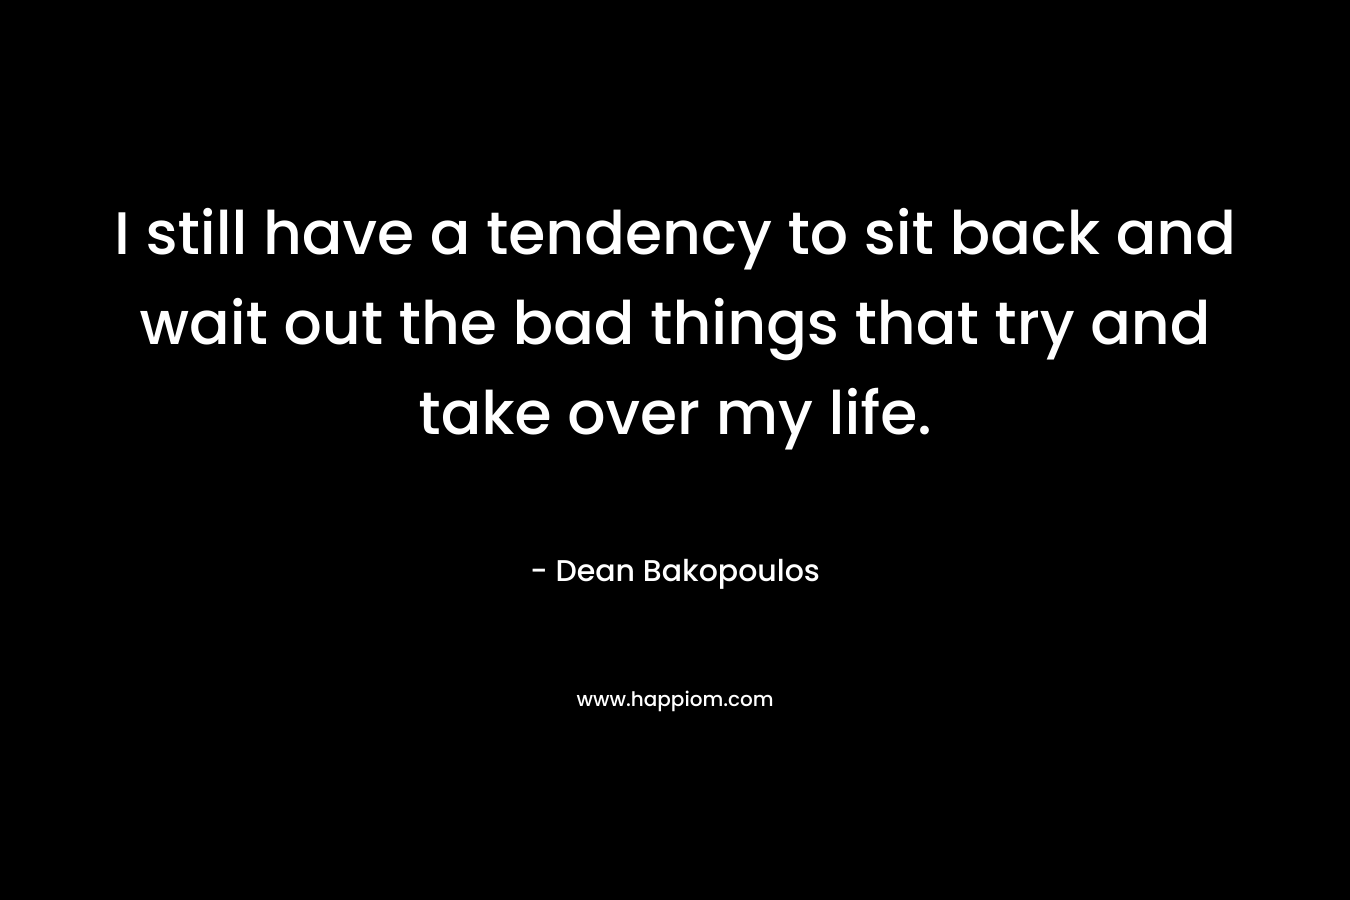 I still have a tendency to sit back and wait out the bad things that try and take over my life. – Dean Bakopoulos